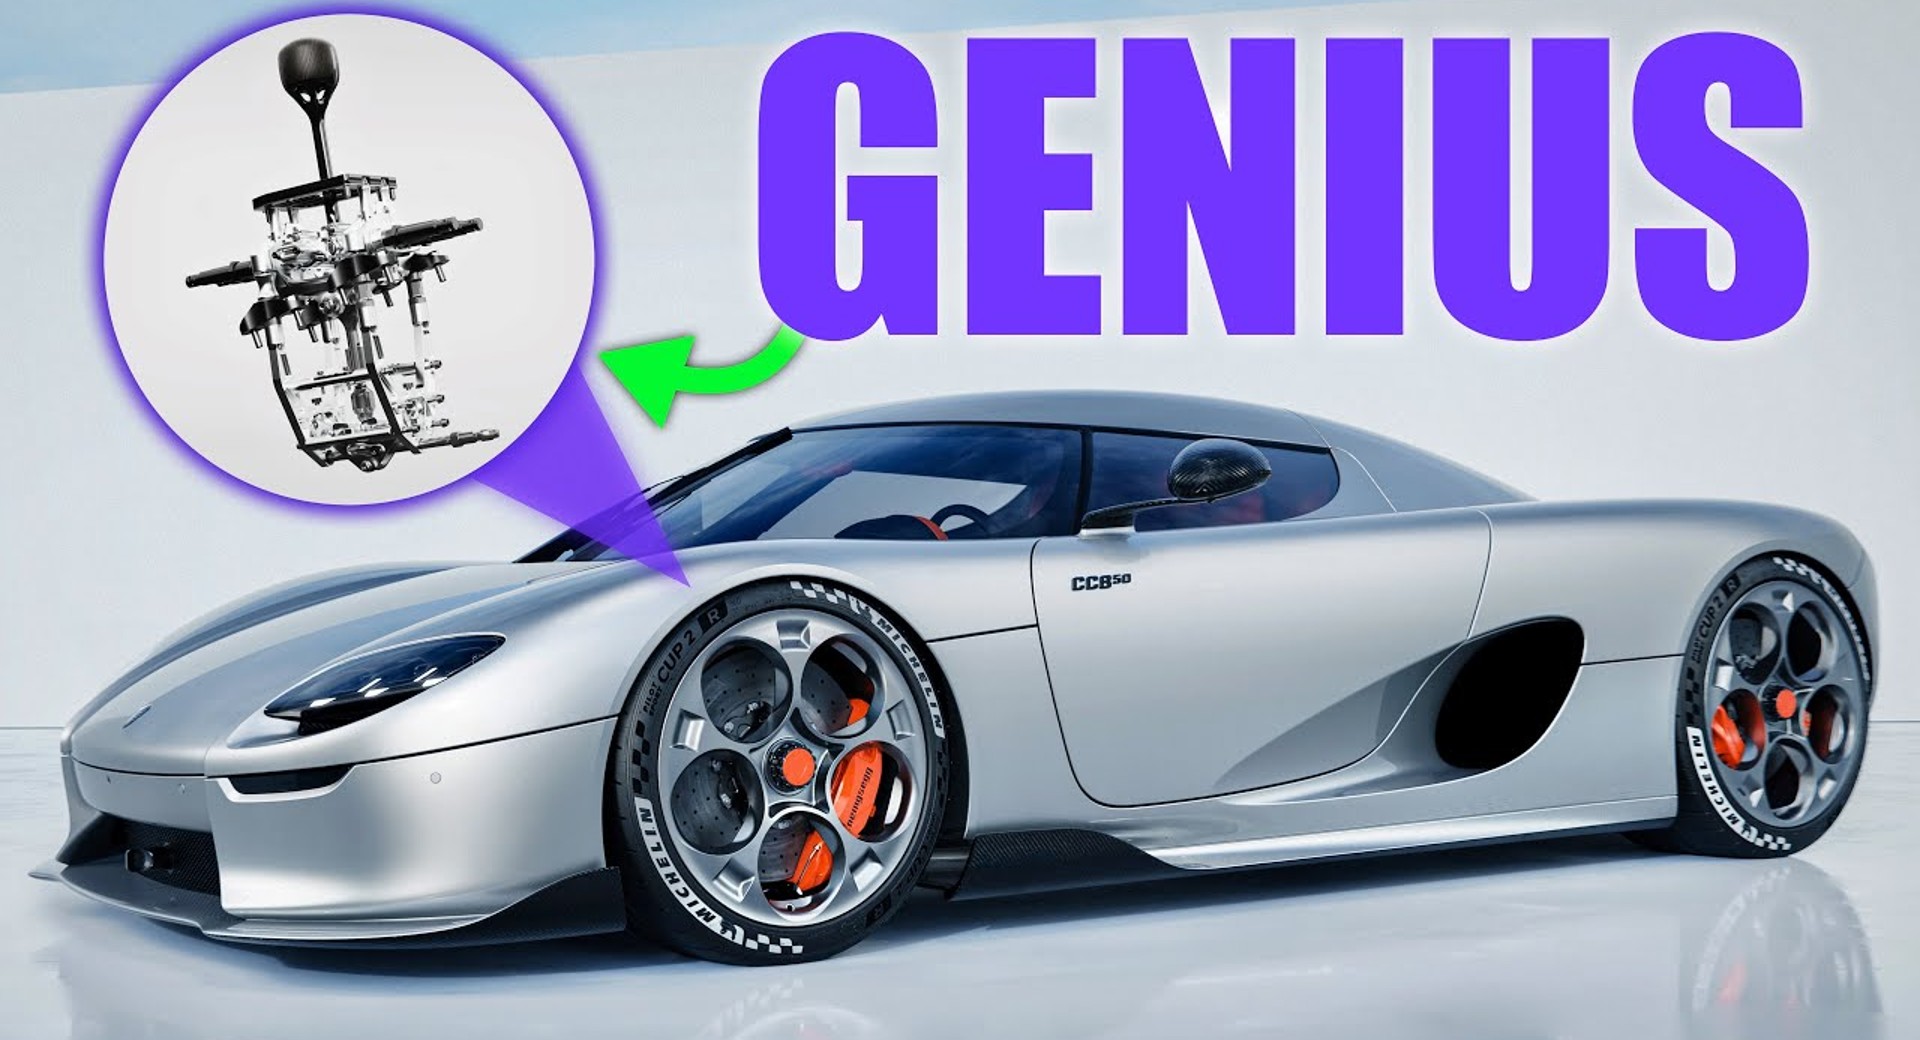 Manuals matter - which exotic cars have the biggest stick-shift